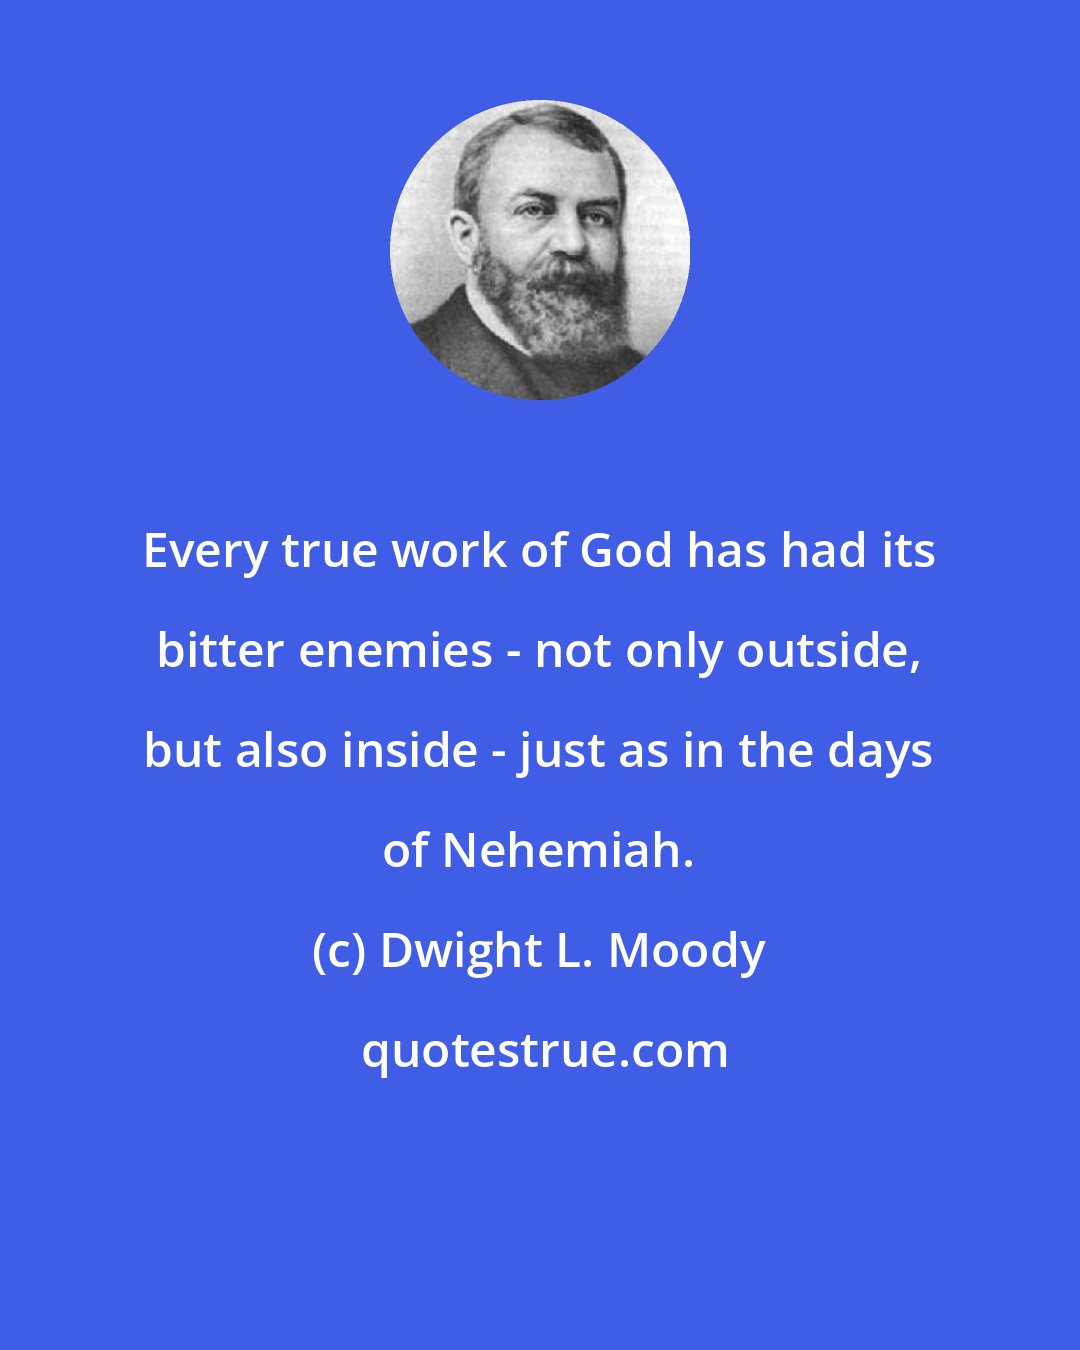 Dwight L. Moody: Every true work of God has had its bitter enemies - not only outside, but also inside - just as in the days of Nehemiah.